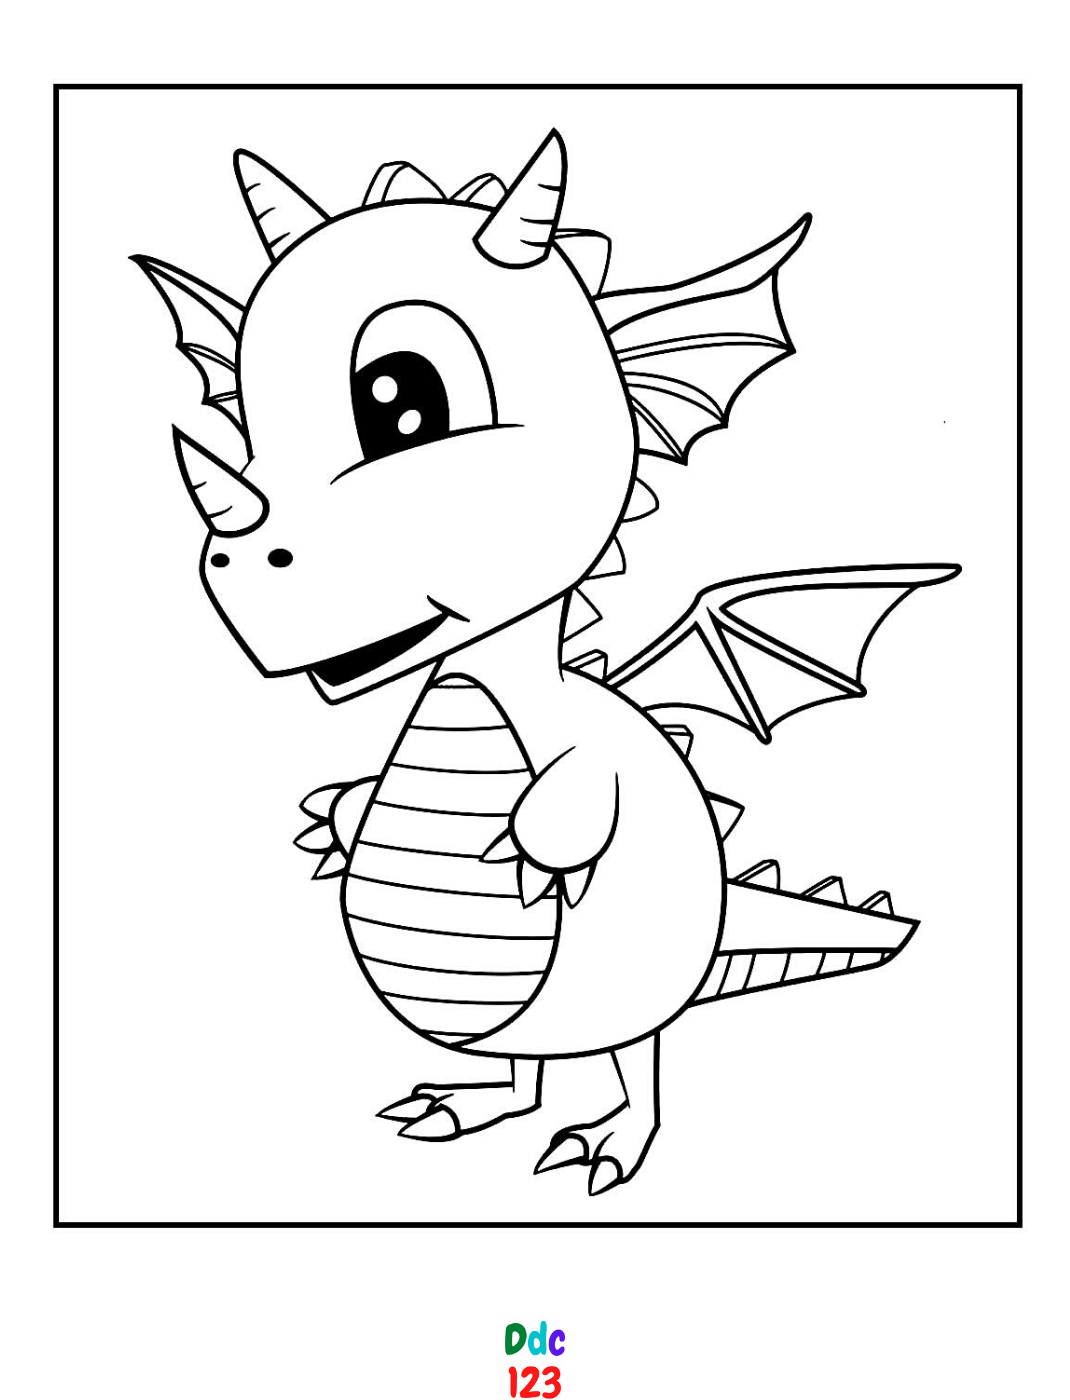 Free Dragon Coloring Pages for kids - DDC123